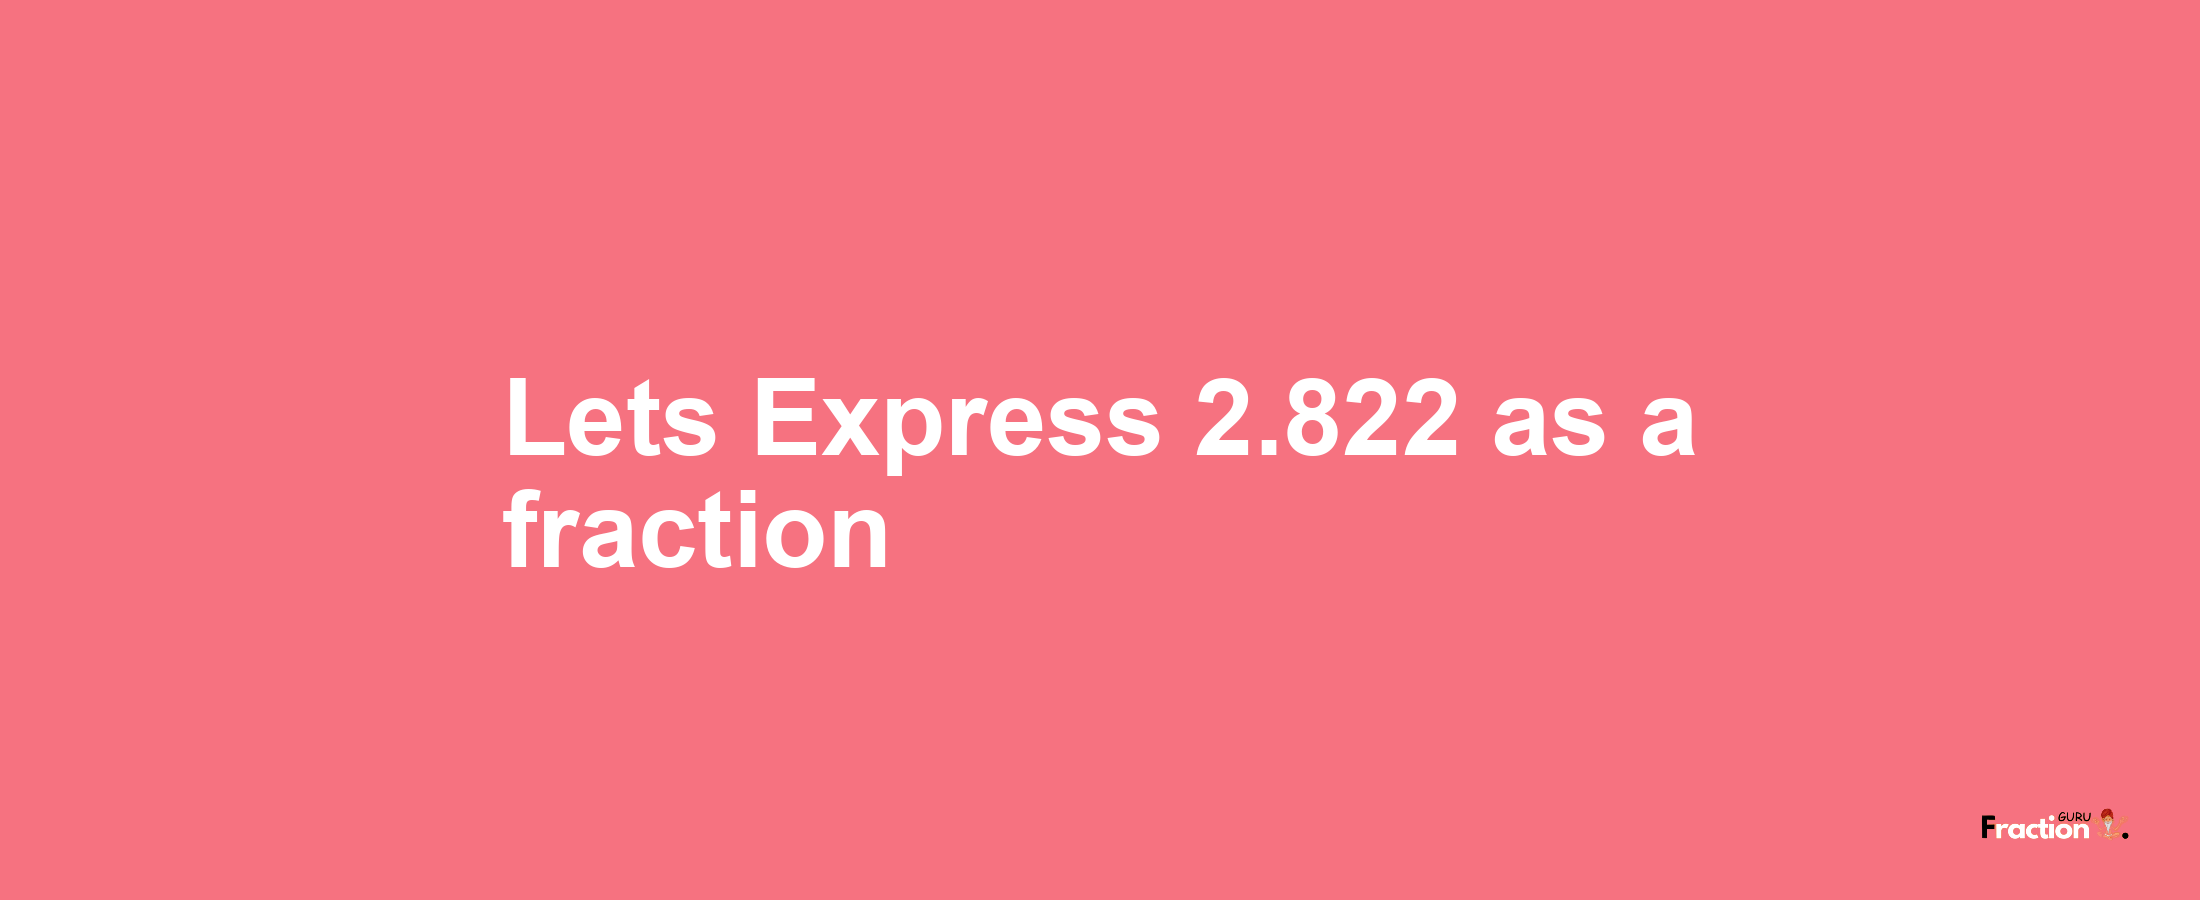 Lets Express 2.822 as afraction